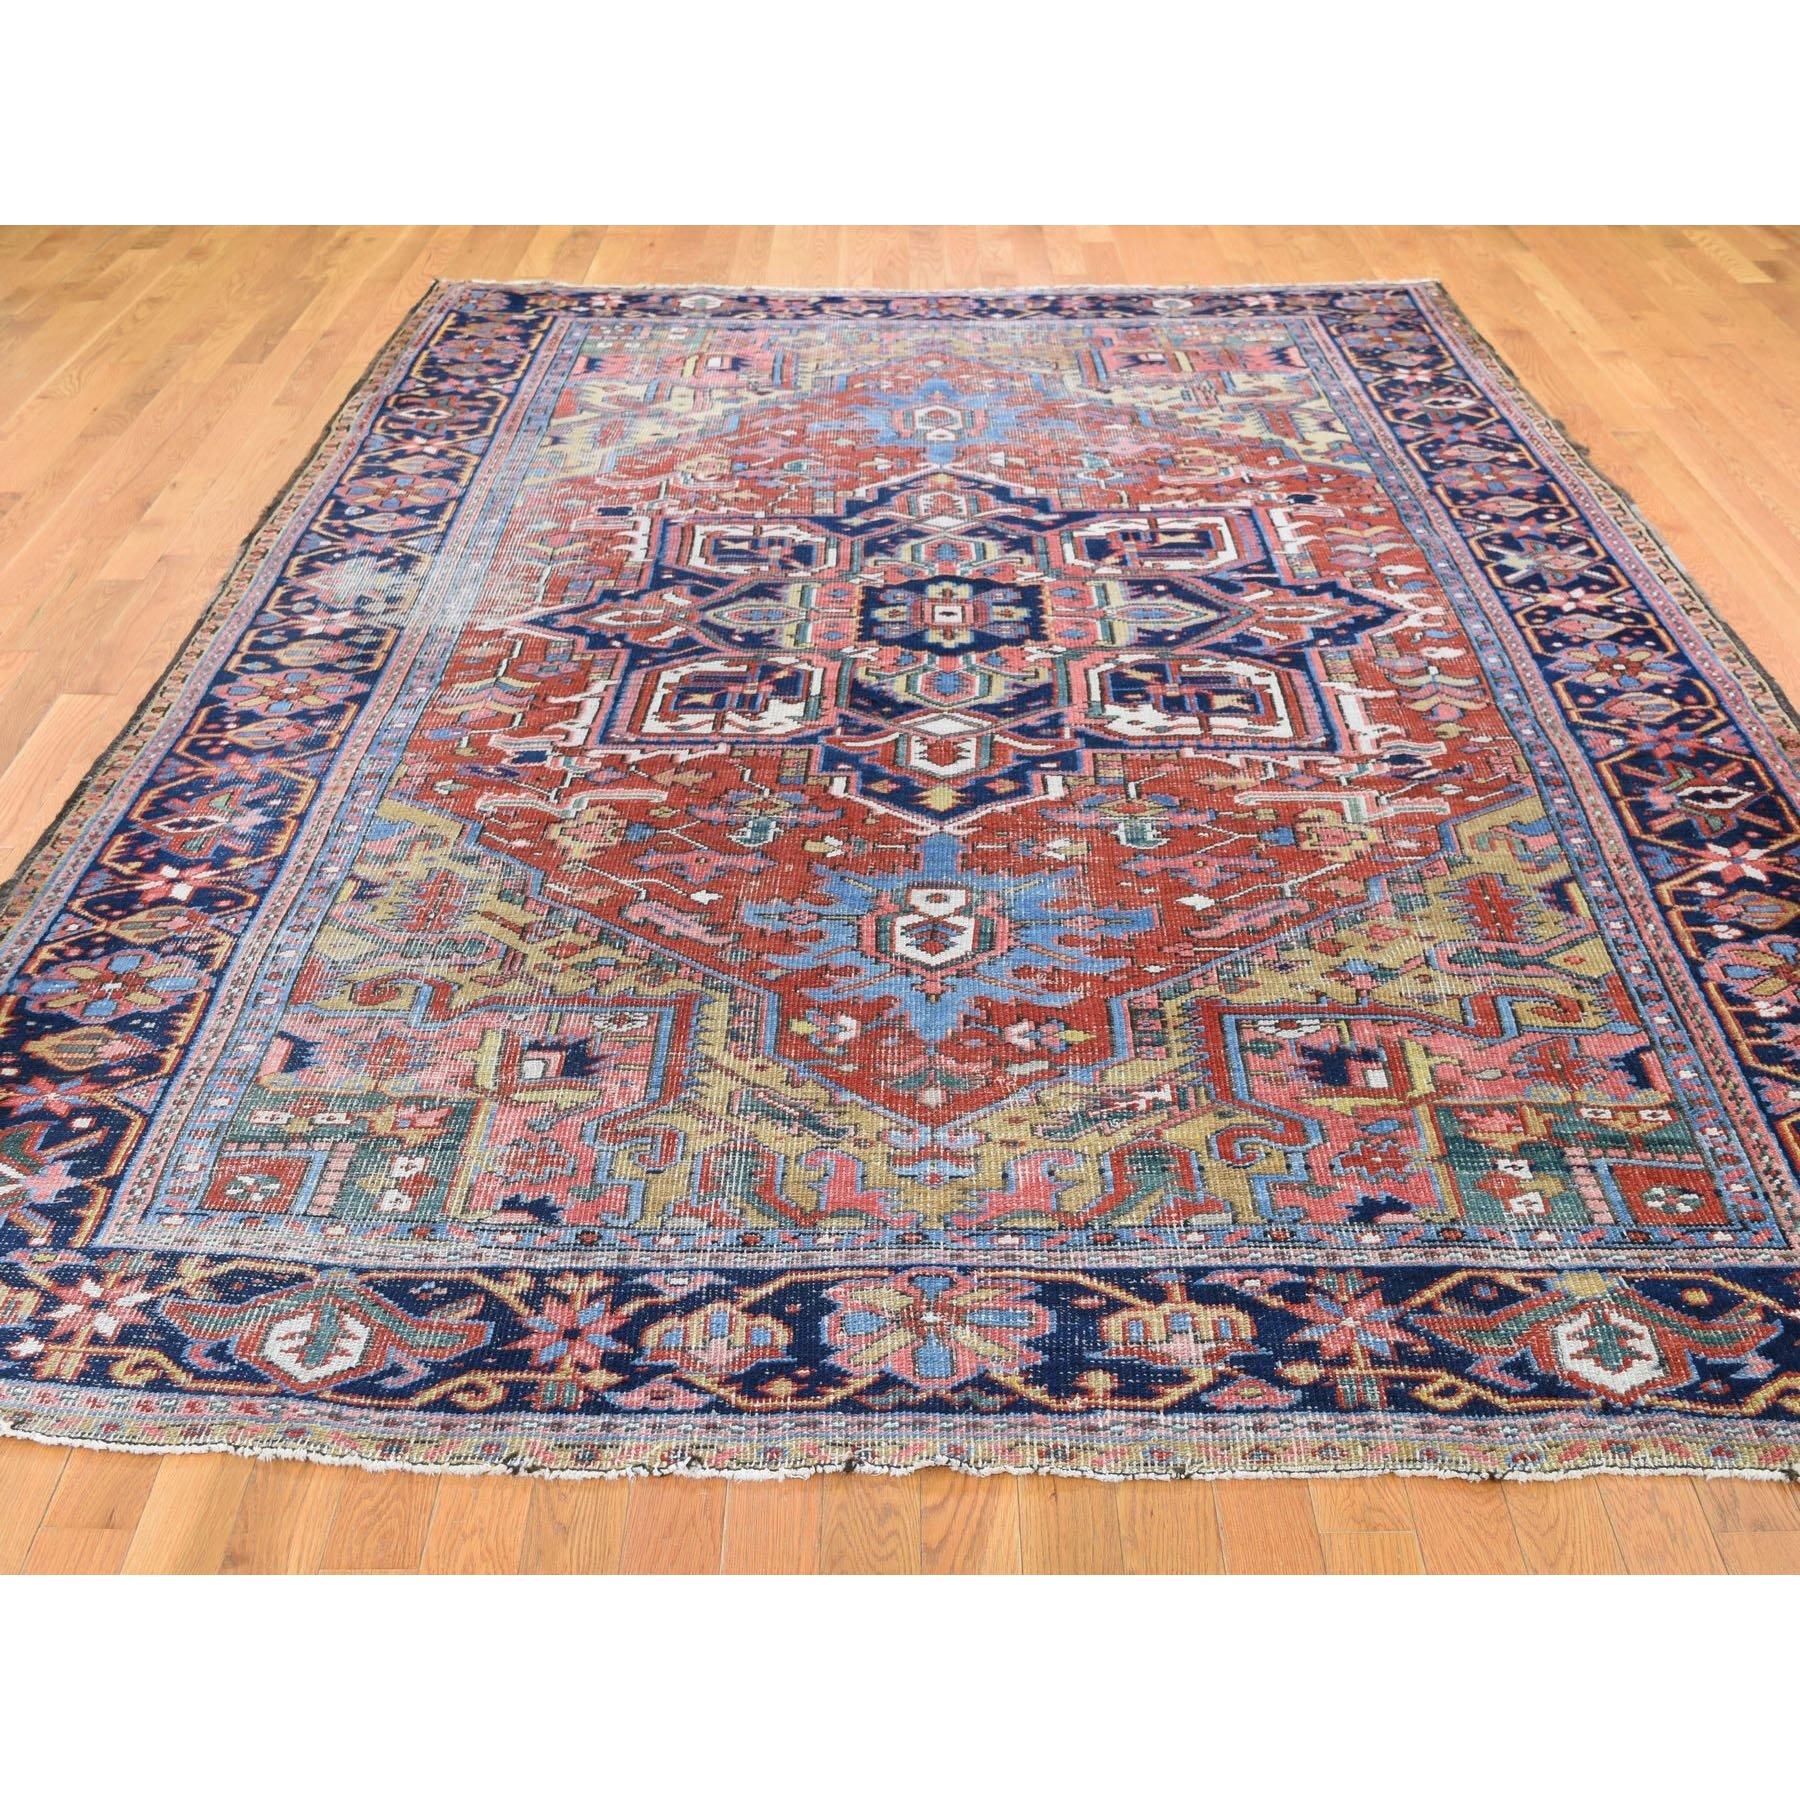 This is a truly genuine one-of-a-kind antique Persian Heriz clean worn but no holes hand knotted rug. It has been knotted for months and months in the centuries-old Persian weaving craftsmanship techniques by expert artisans. Measures: 7'9